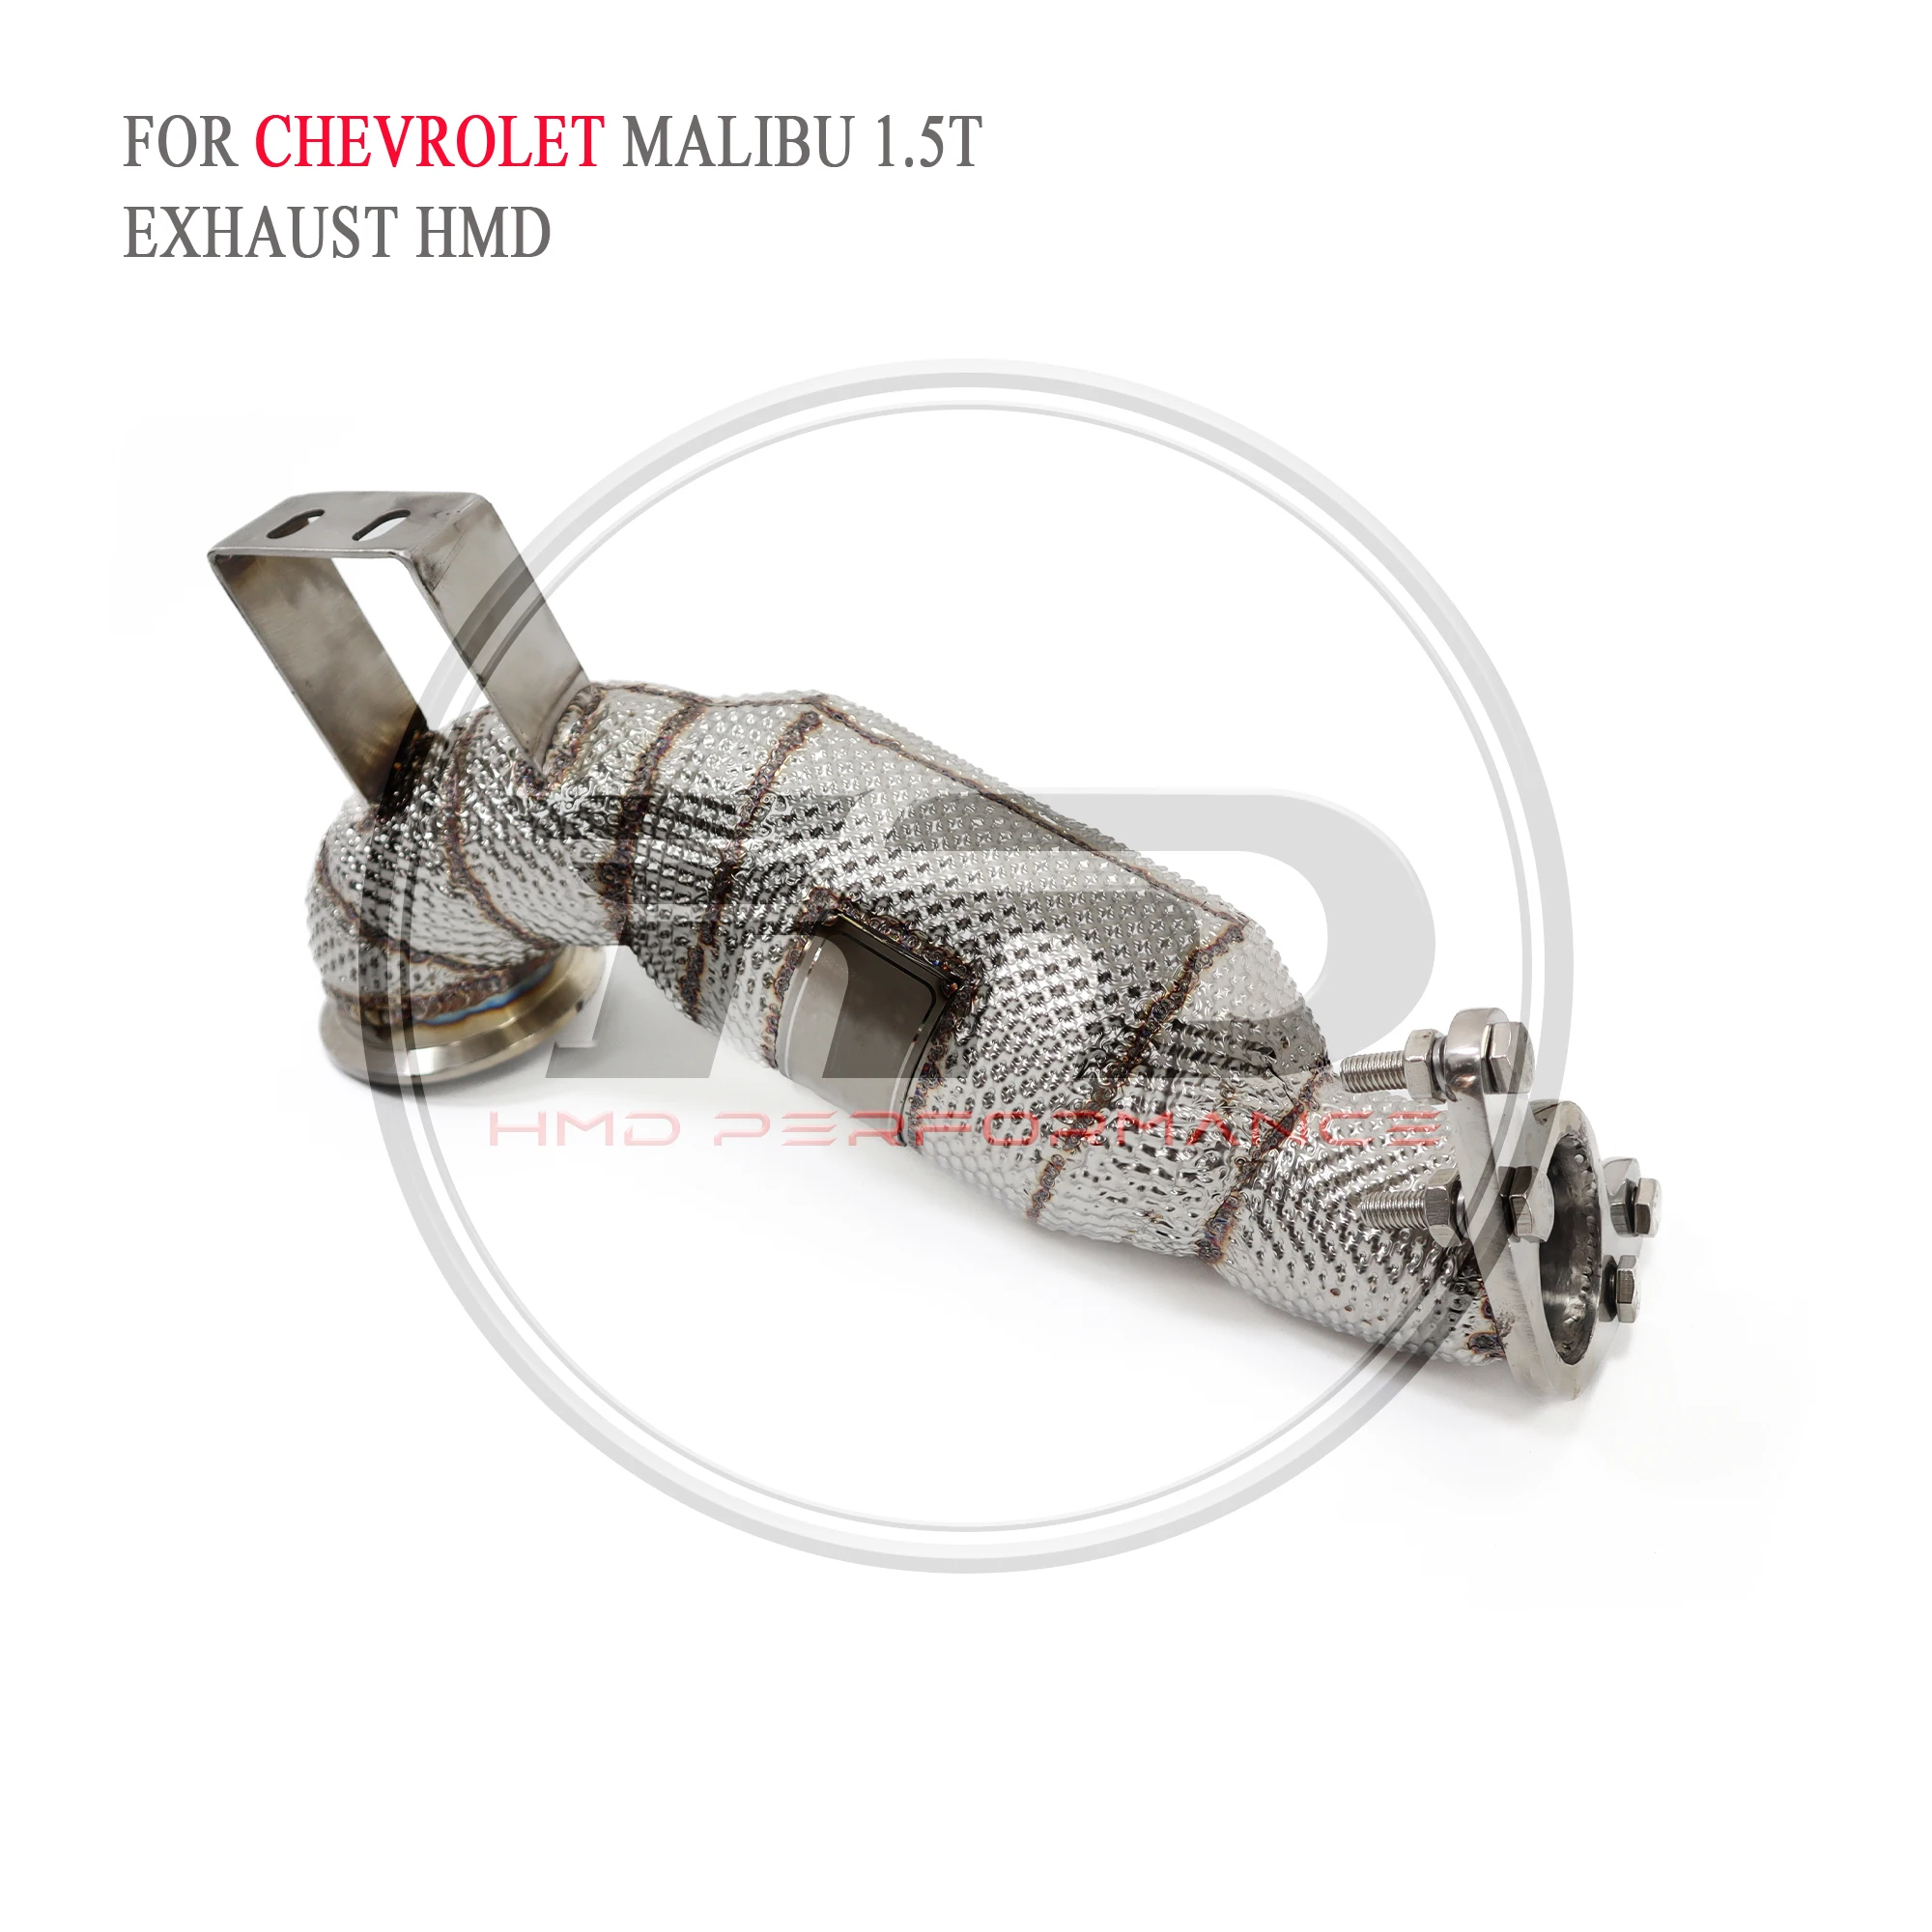 

HMD Stainless Steel exhaust system Raindrop insulated Cat back and downpipe Chevrolet Malibu 1.5T Auto parts